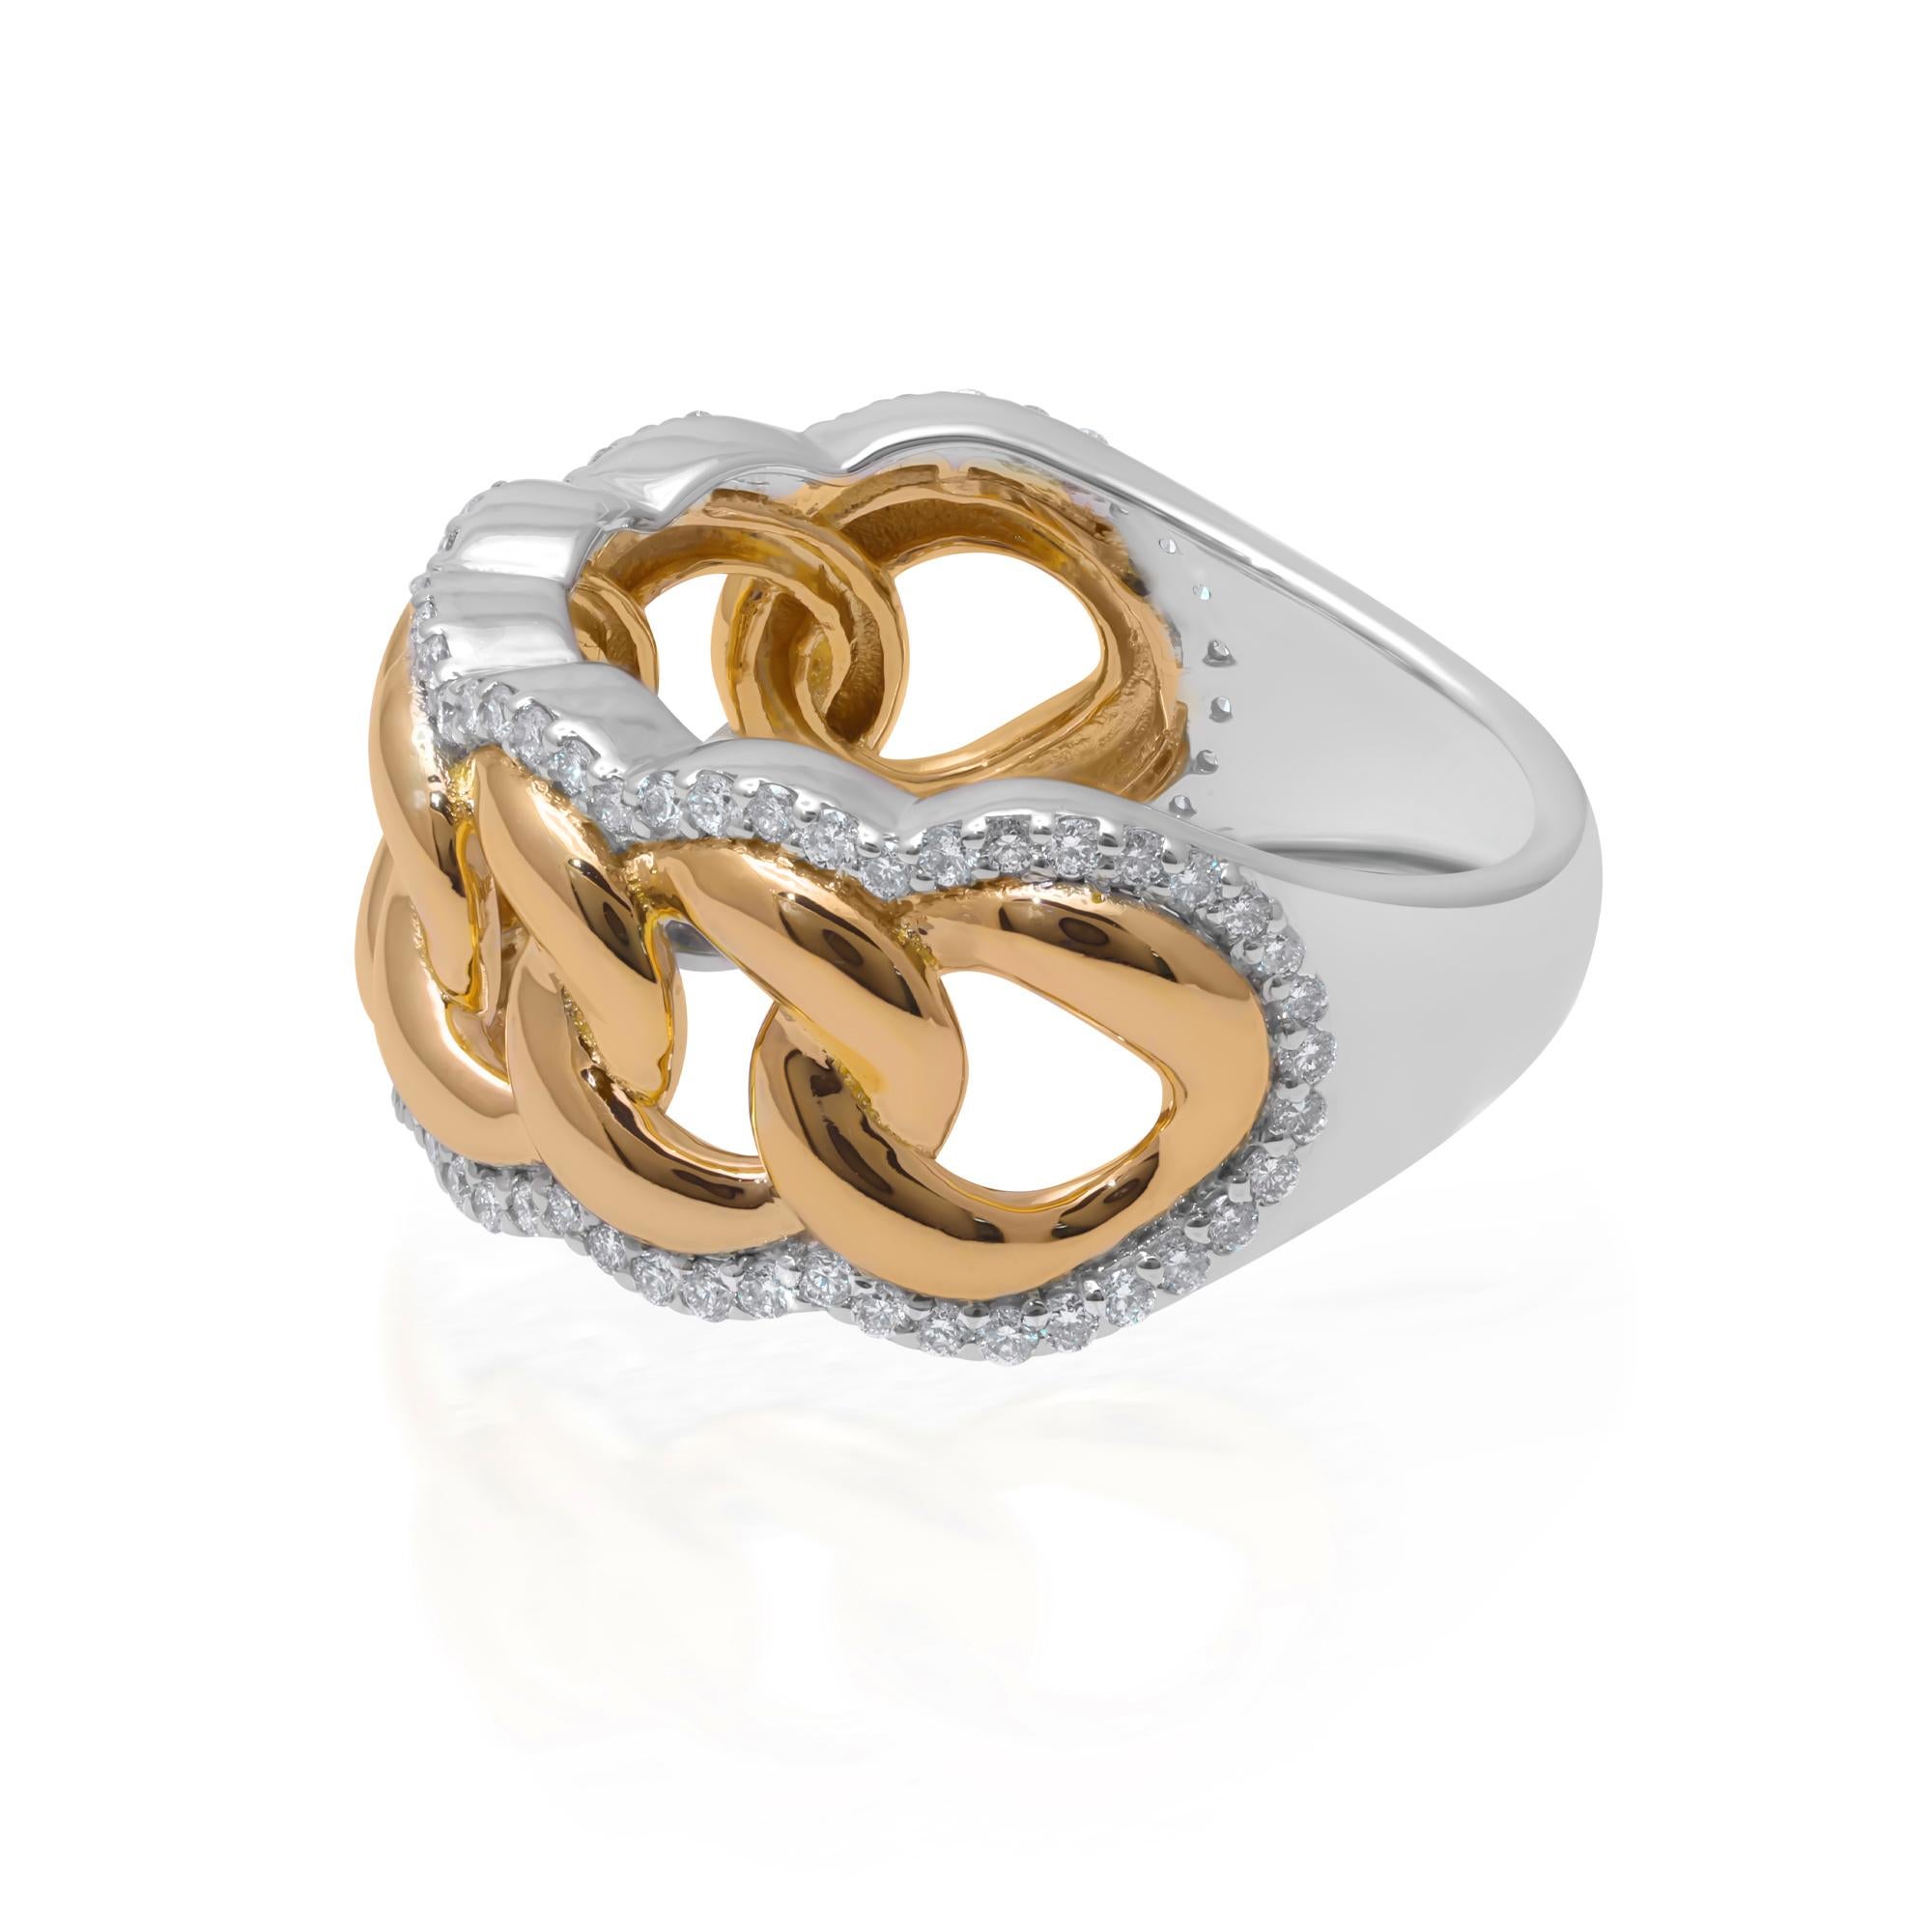 The Cuban link chain motif, a symbol of strength and unity, adorns the band of the ring, adding a touch of urban chic to its timeless elegance. Crafted with precision and attention to detail, each link is carefully formed and interconnected,